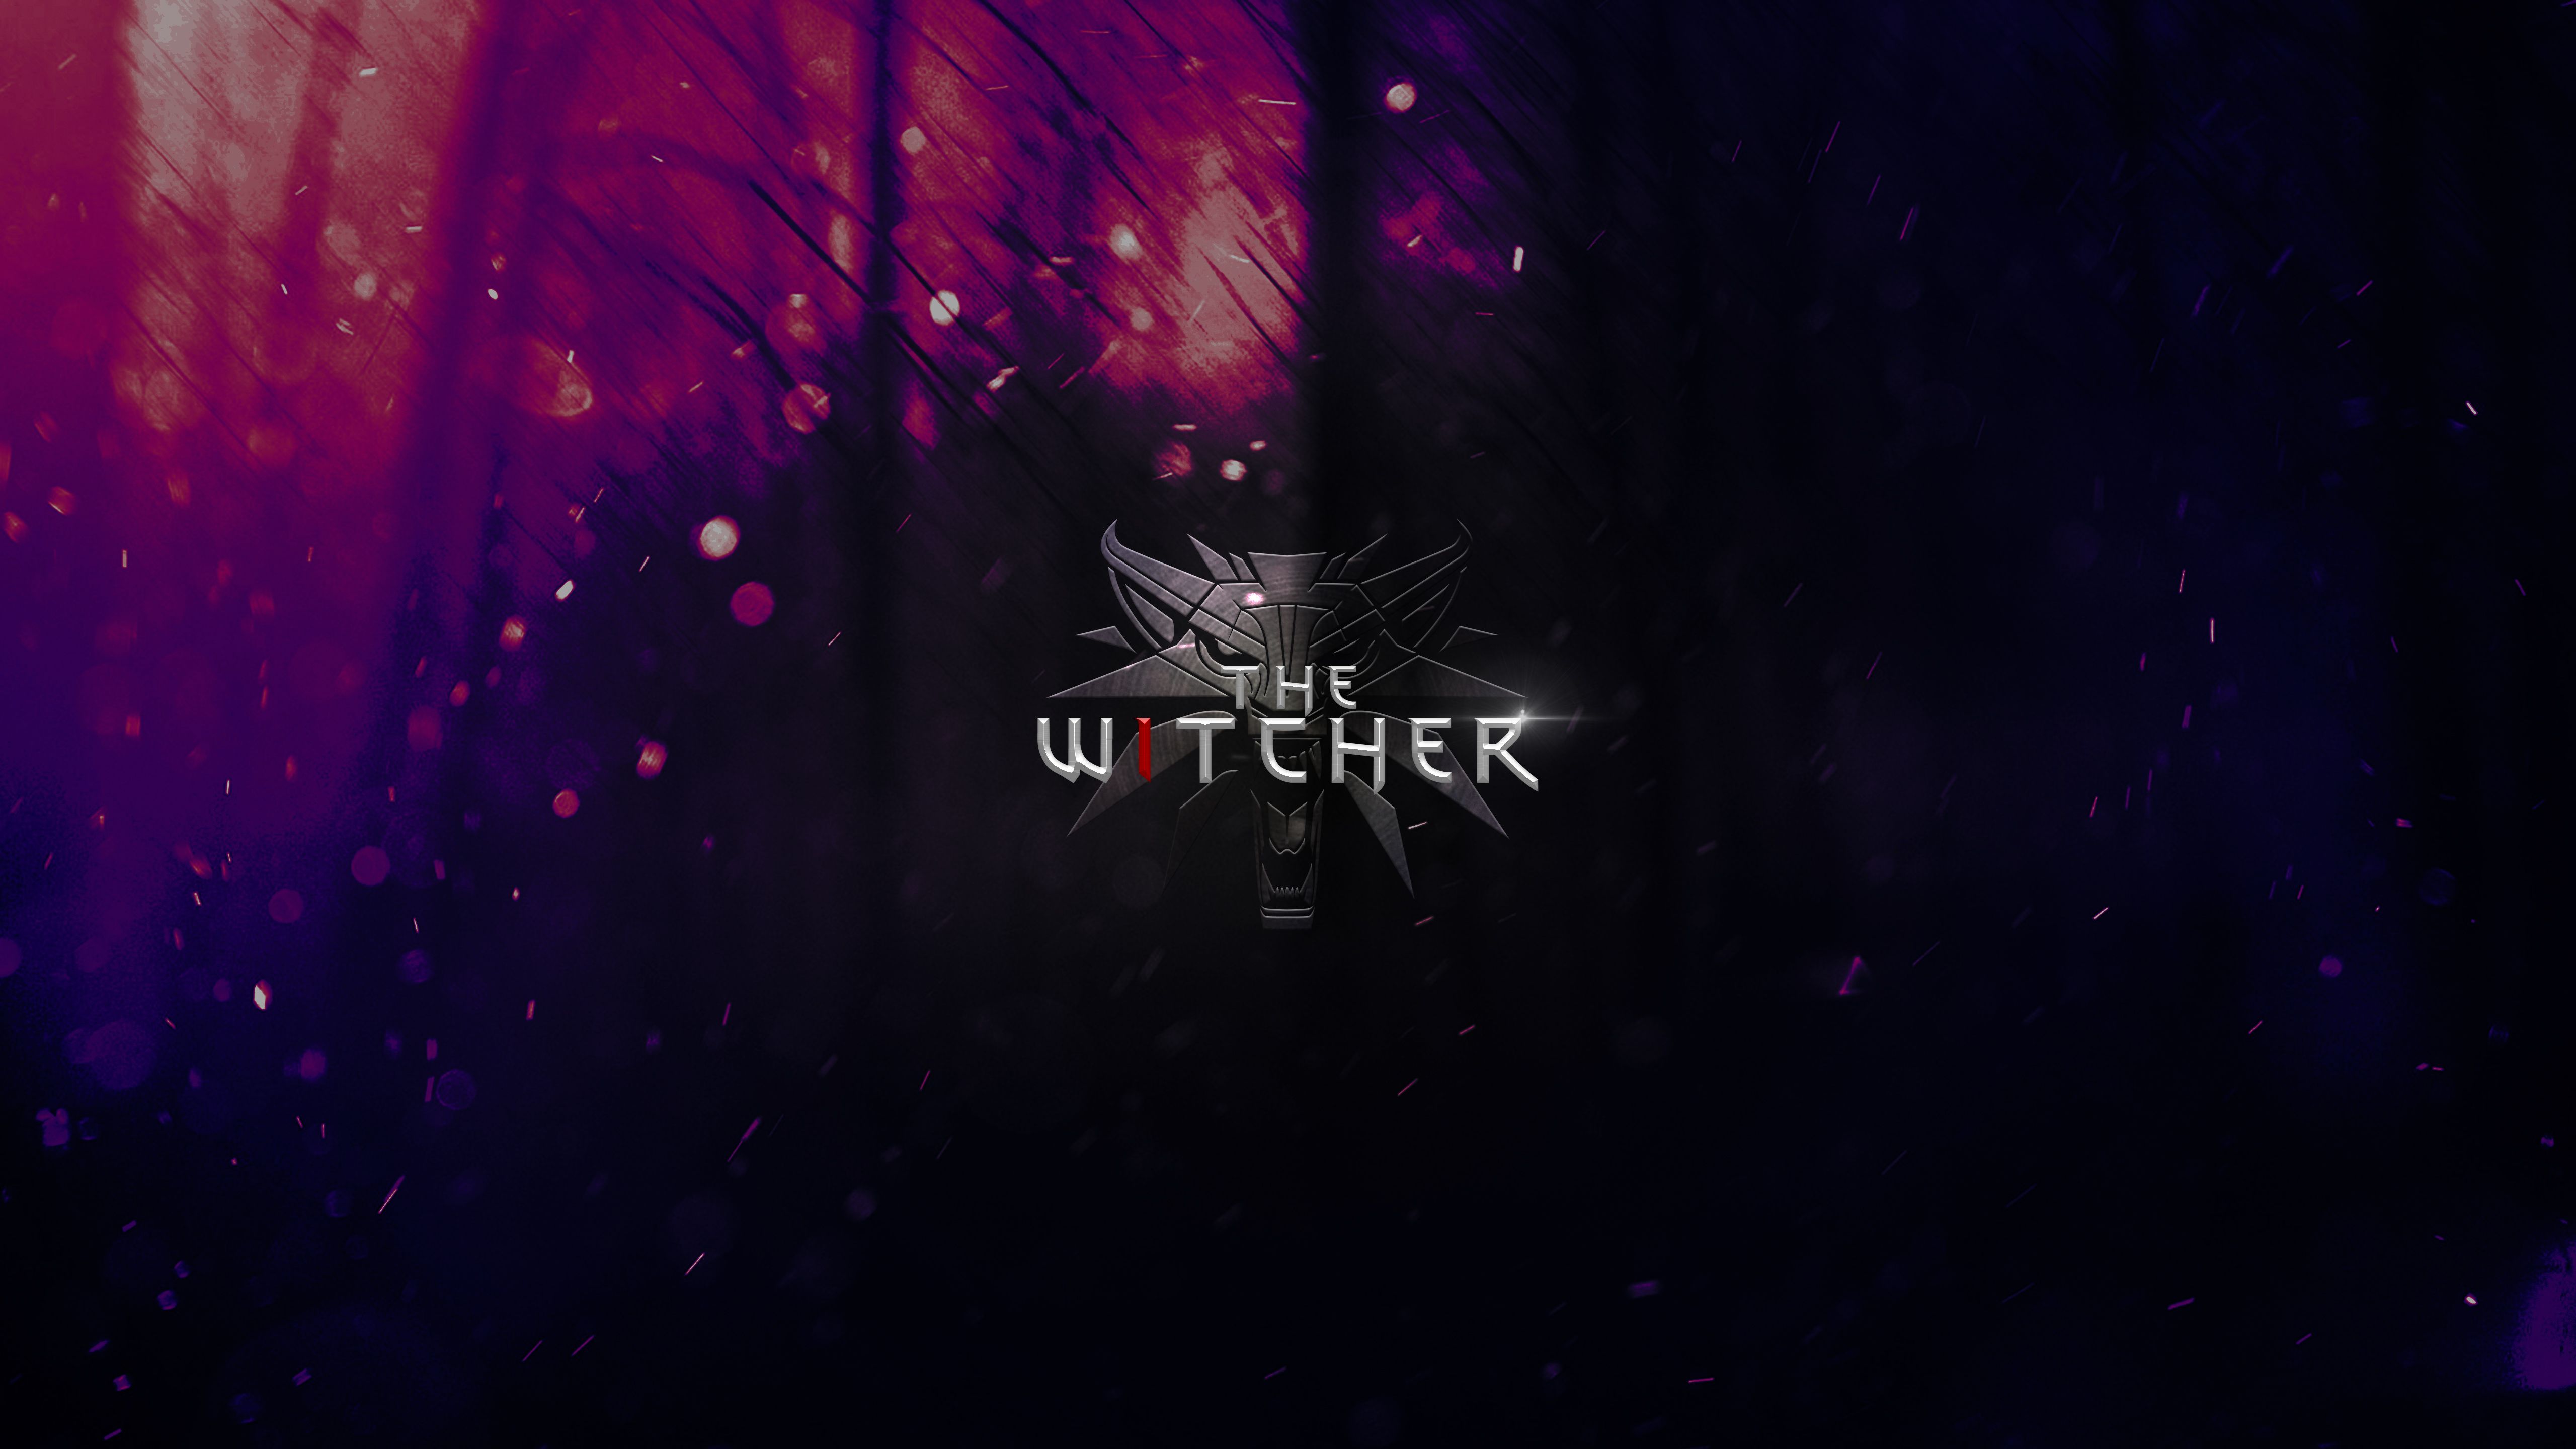 Witcher Symbol Wallpapers